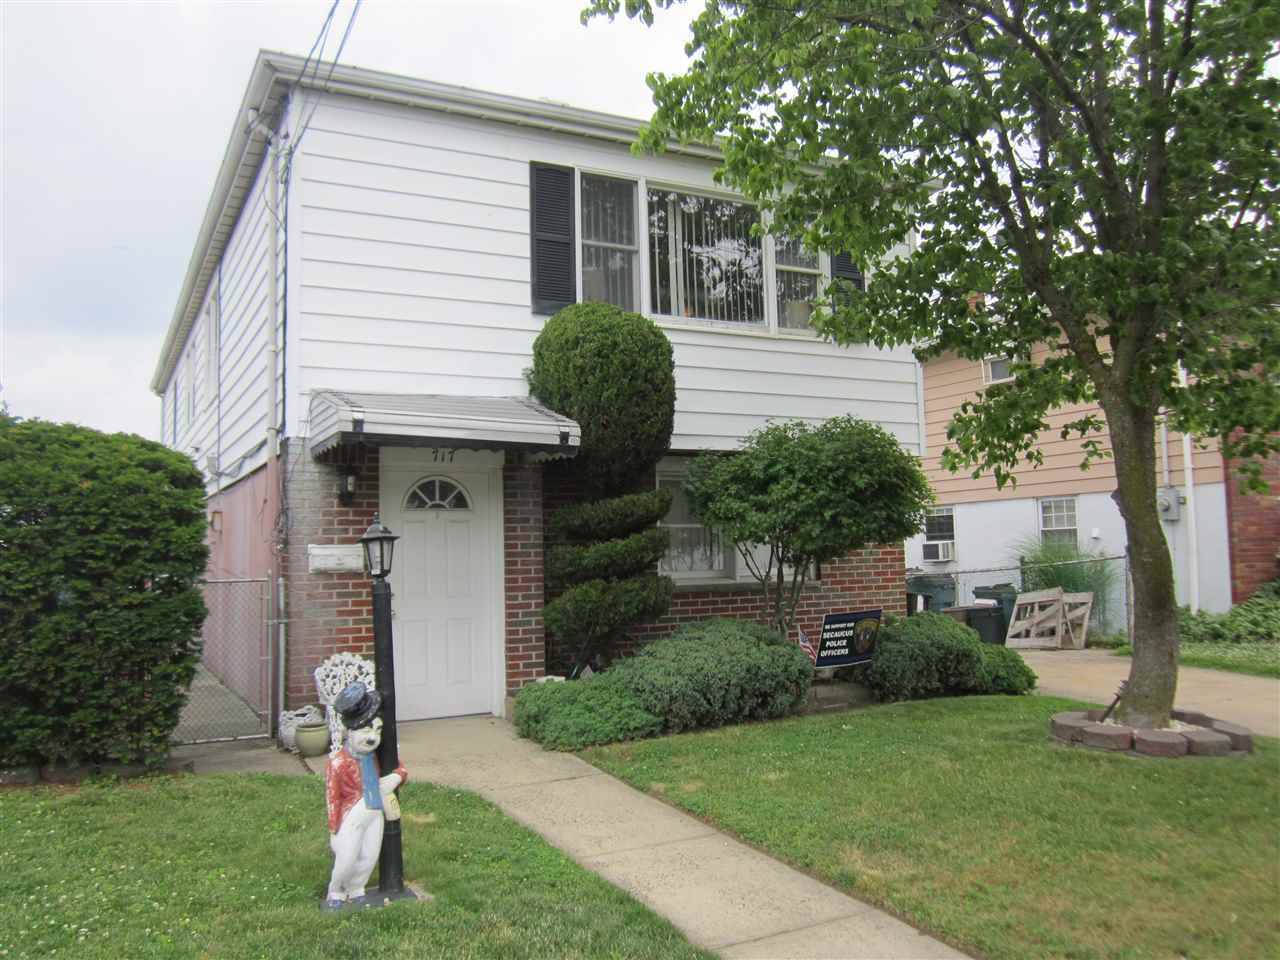 Lovely 3 bedroom/1 bath apartment on the 2nd floor of a nicely maintained 2 family home in the heart of Secaucus